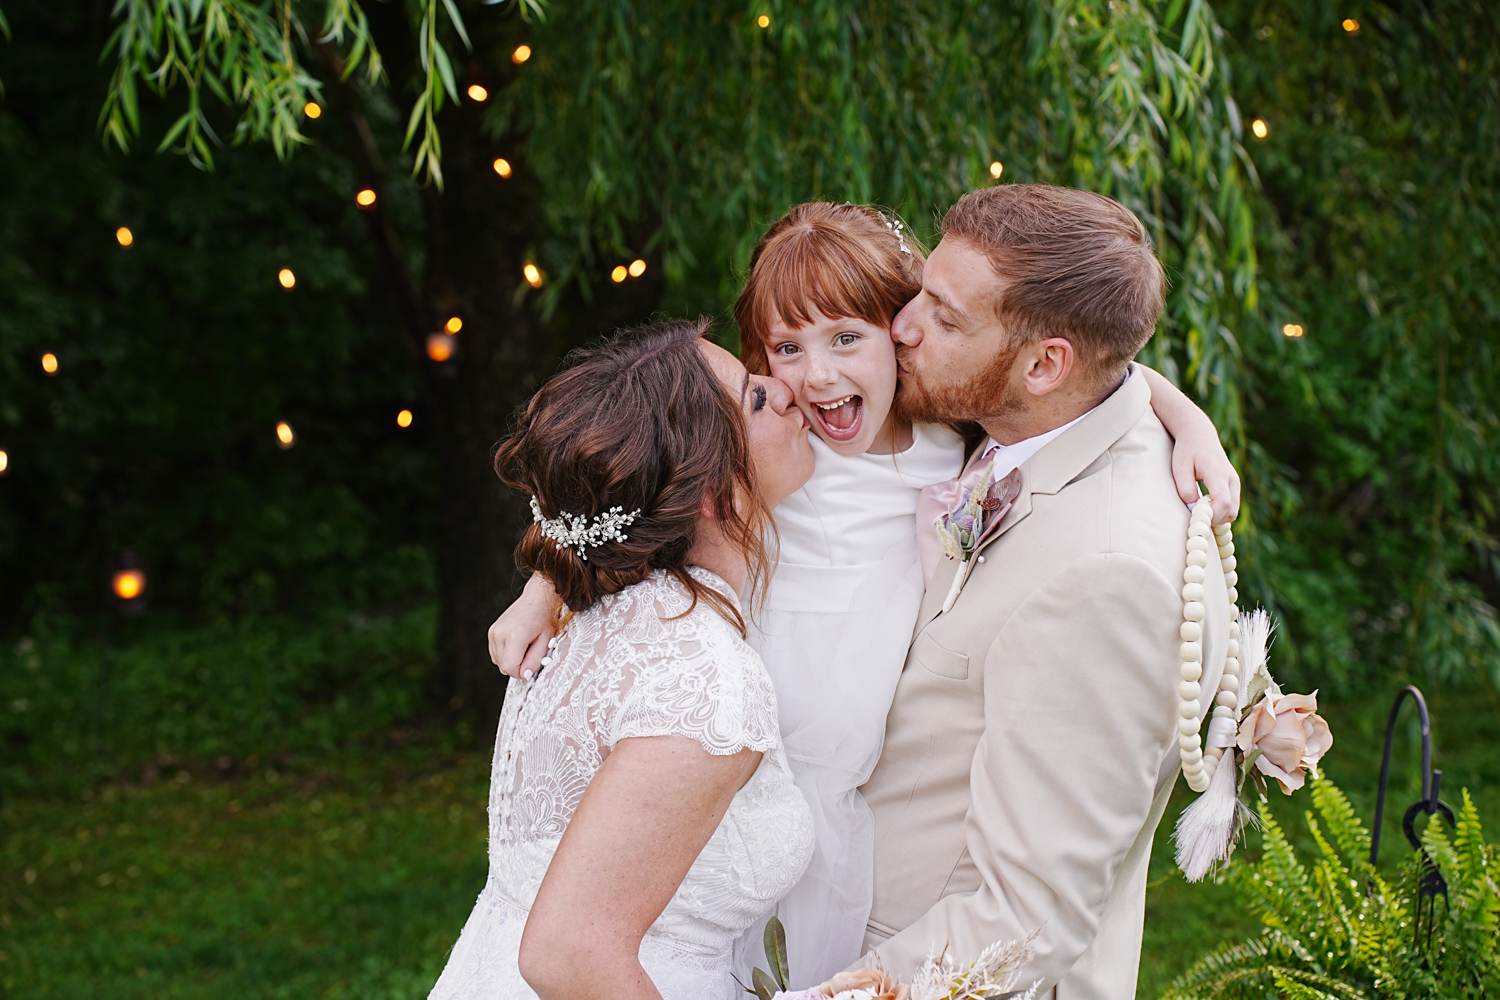 Wedding couple kissing their smiling happy daughter under a willow tree with twinkling lights